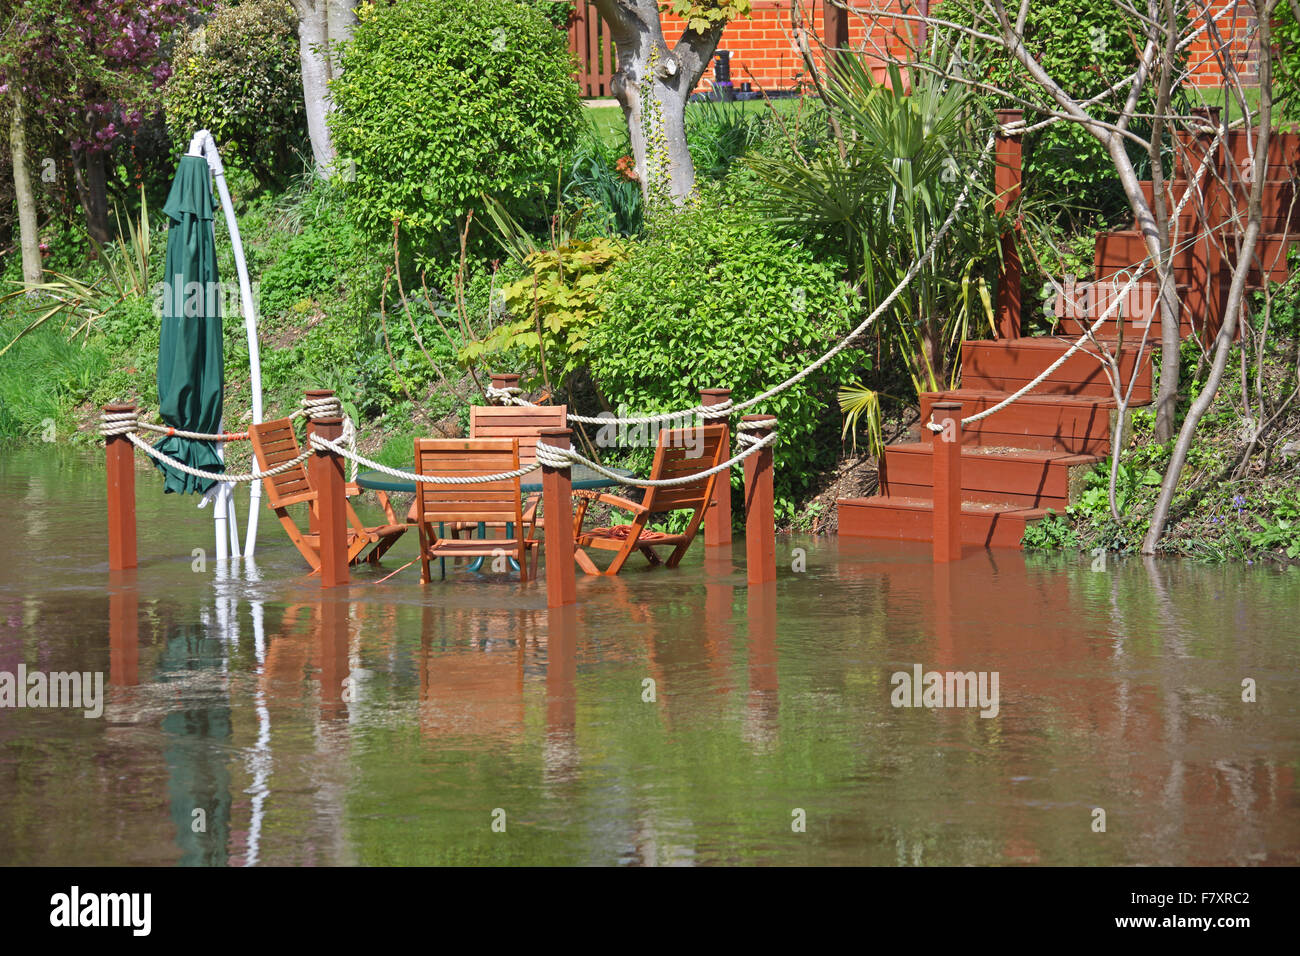 A set of wooden steps leading down to wooden chairs with a table and sunshade outside in a rear garden half covered in water Stock Photo